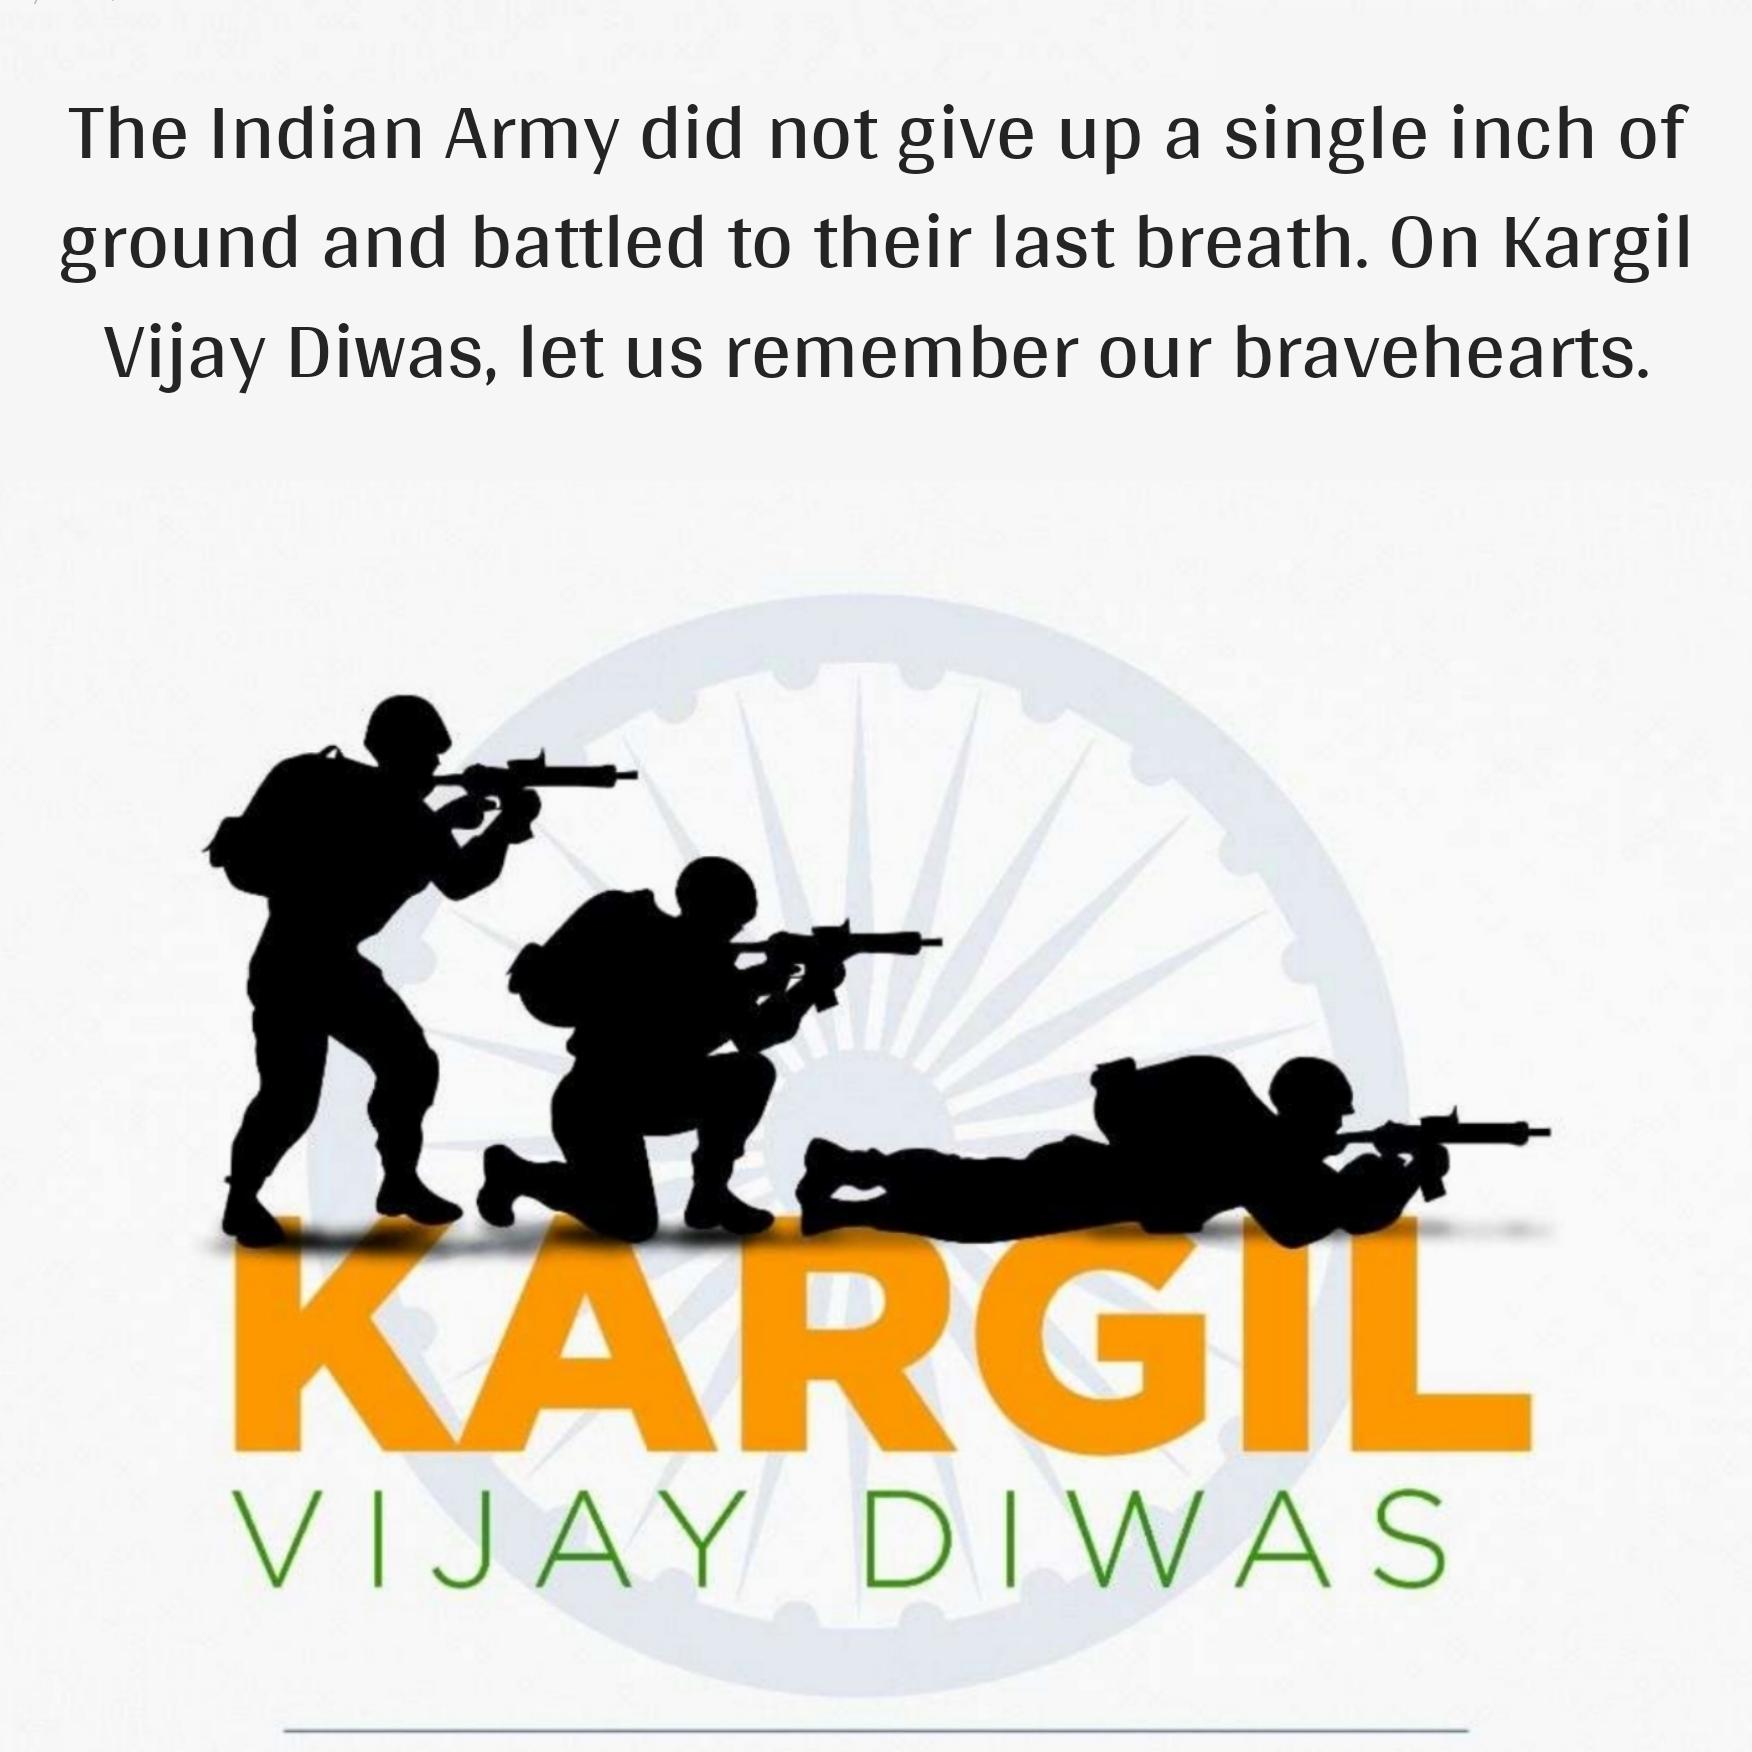 The Indian Army did not give up a single inch of ground